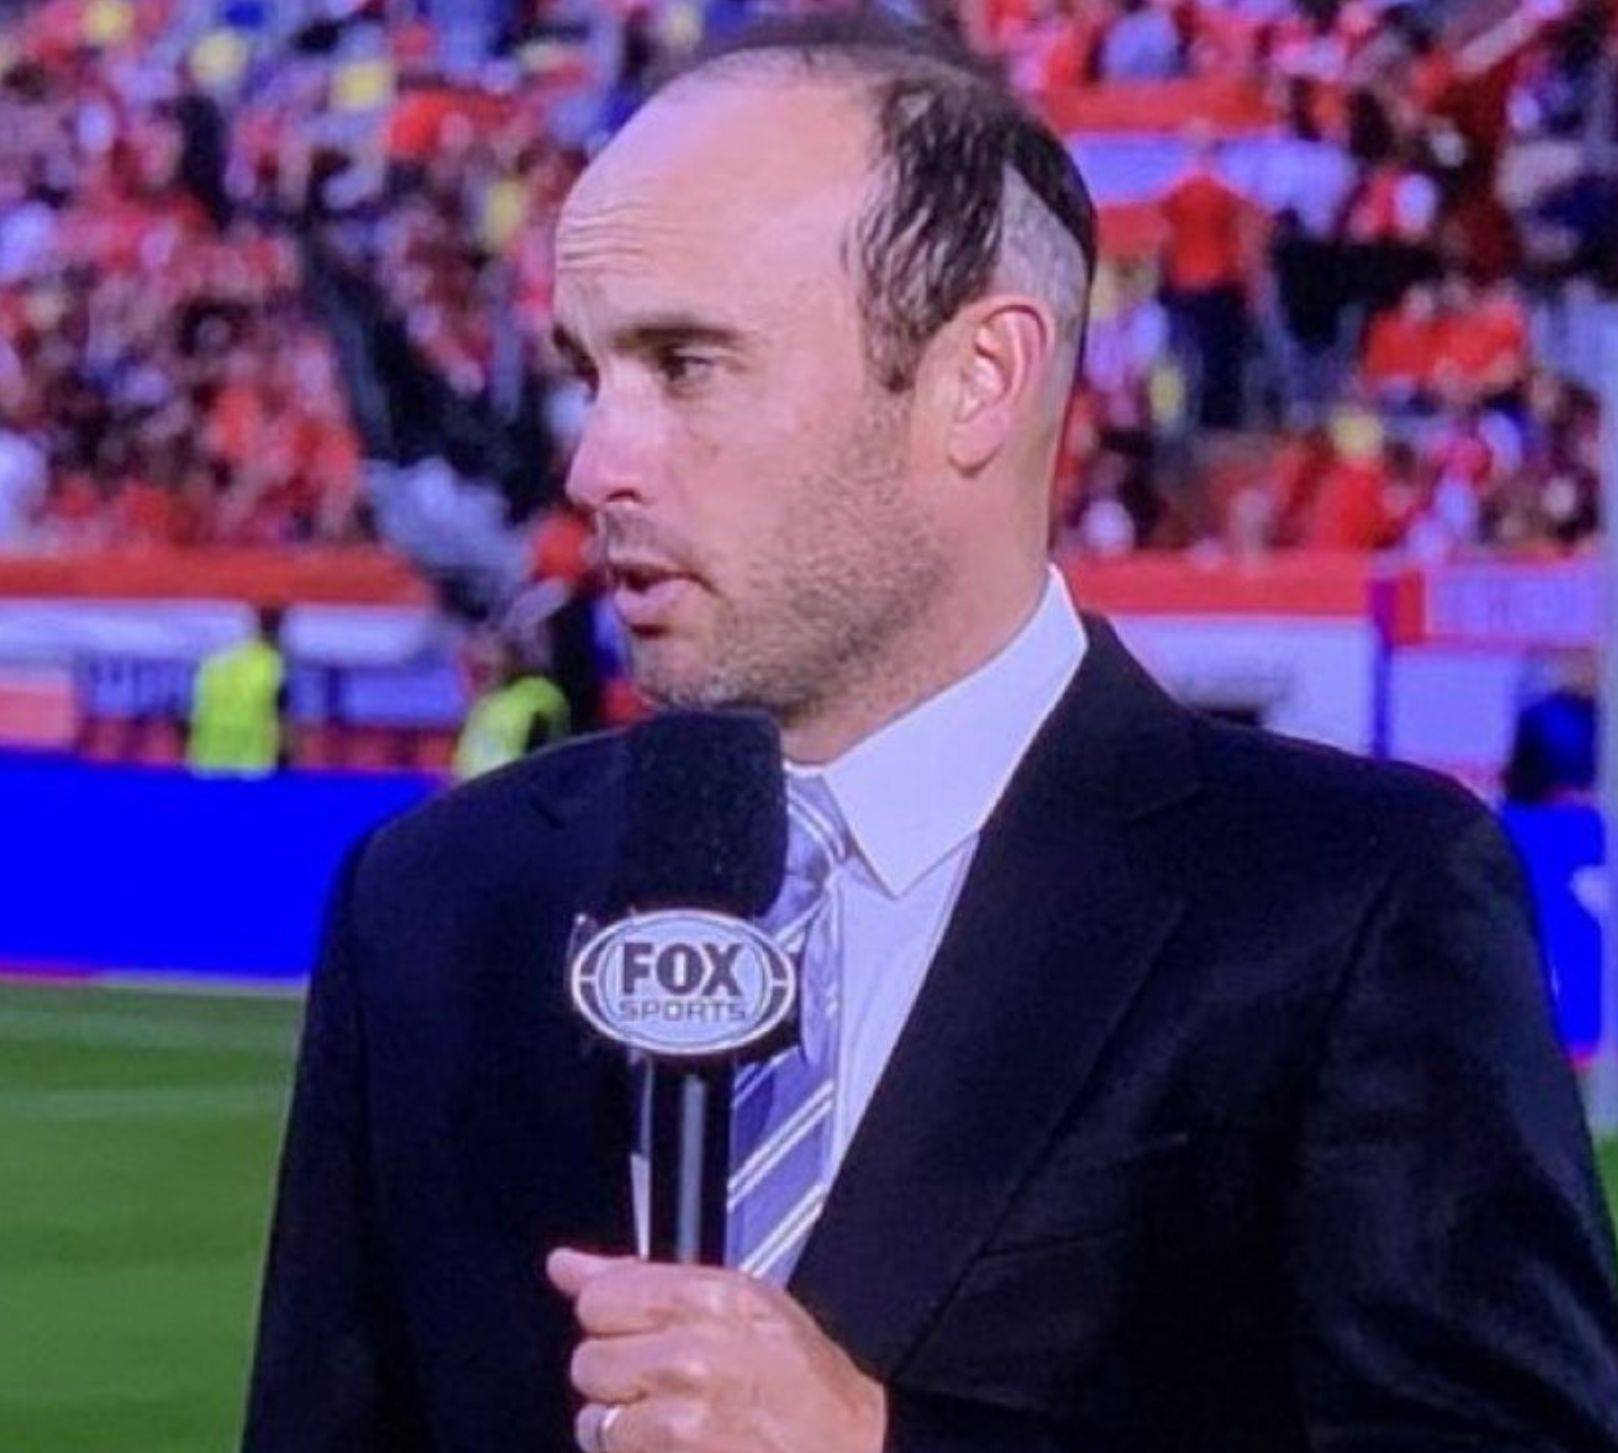 Donovan's Hair Transplant Gone Wrong, Exposed During Live Euro Coverage